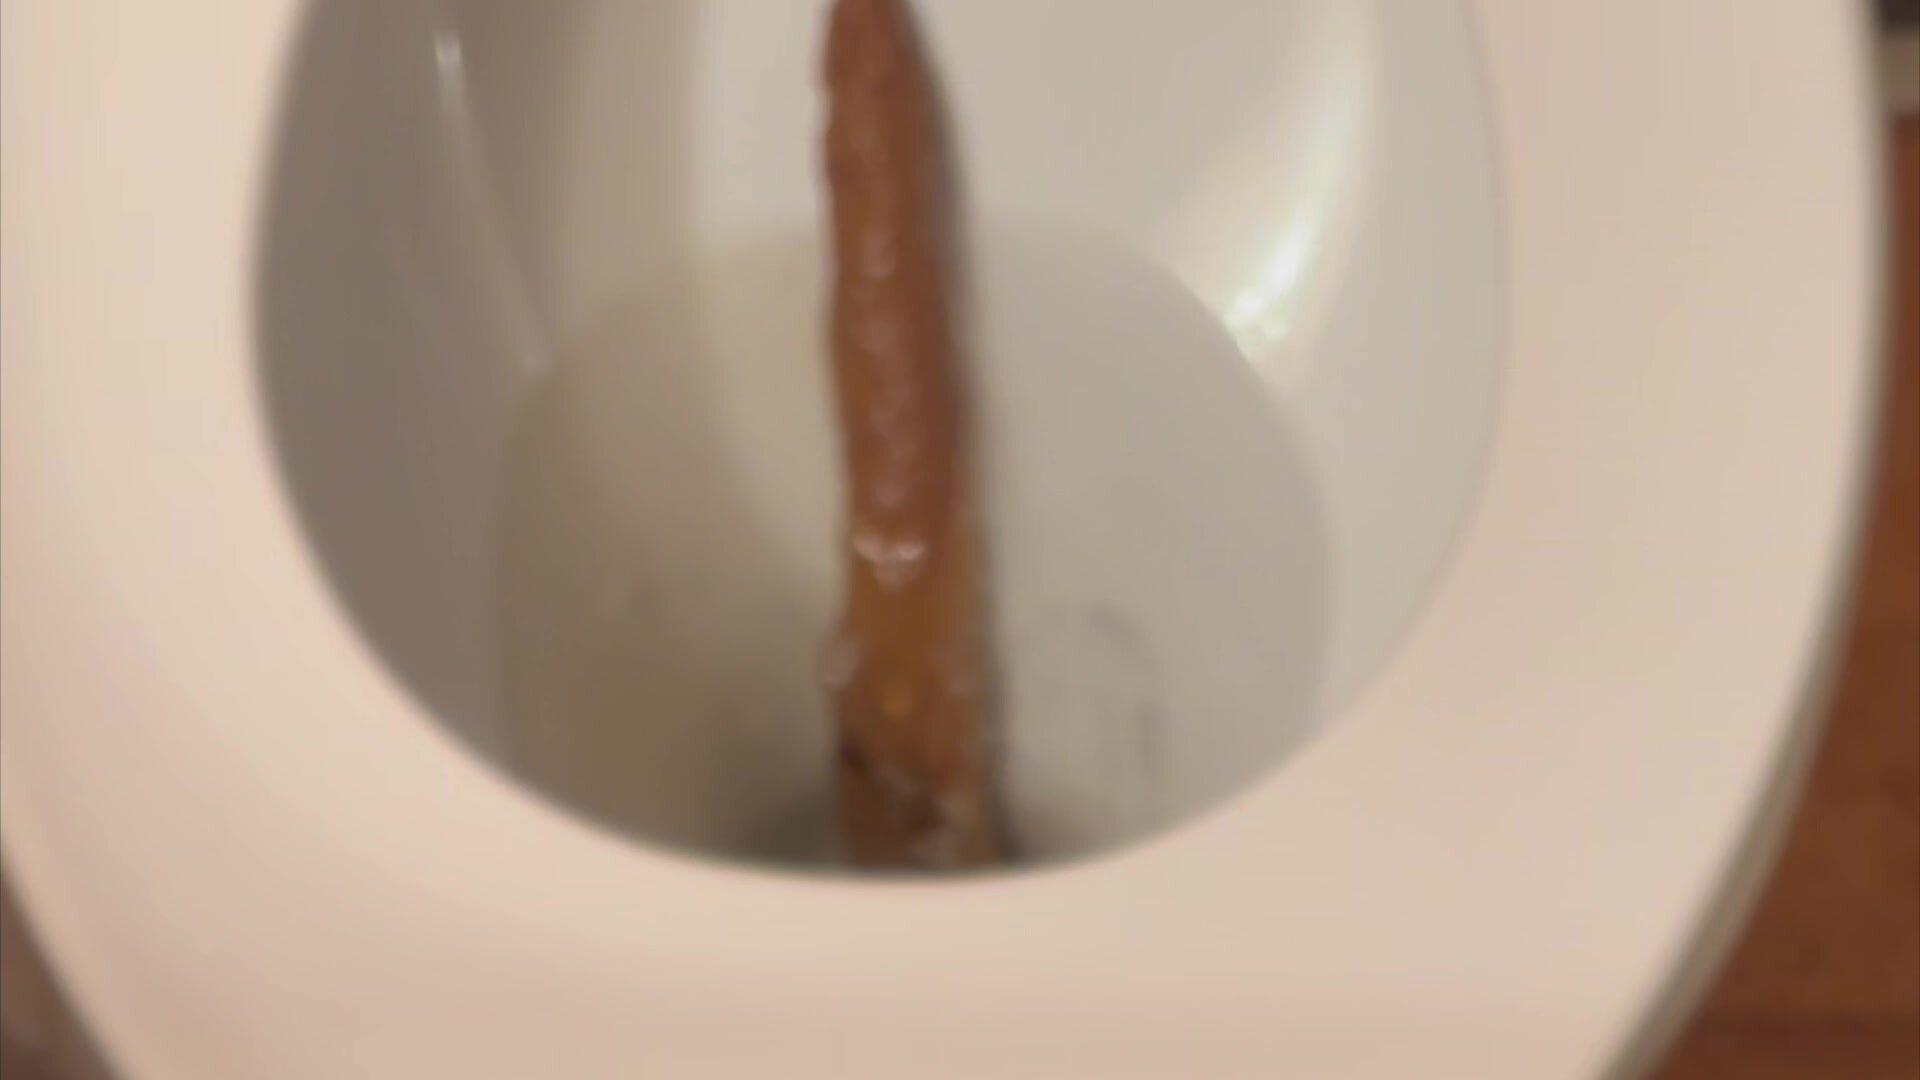 Another footlong turd